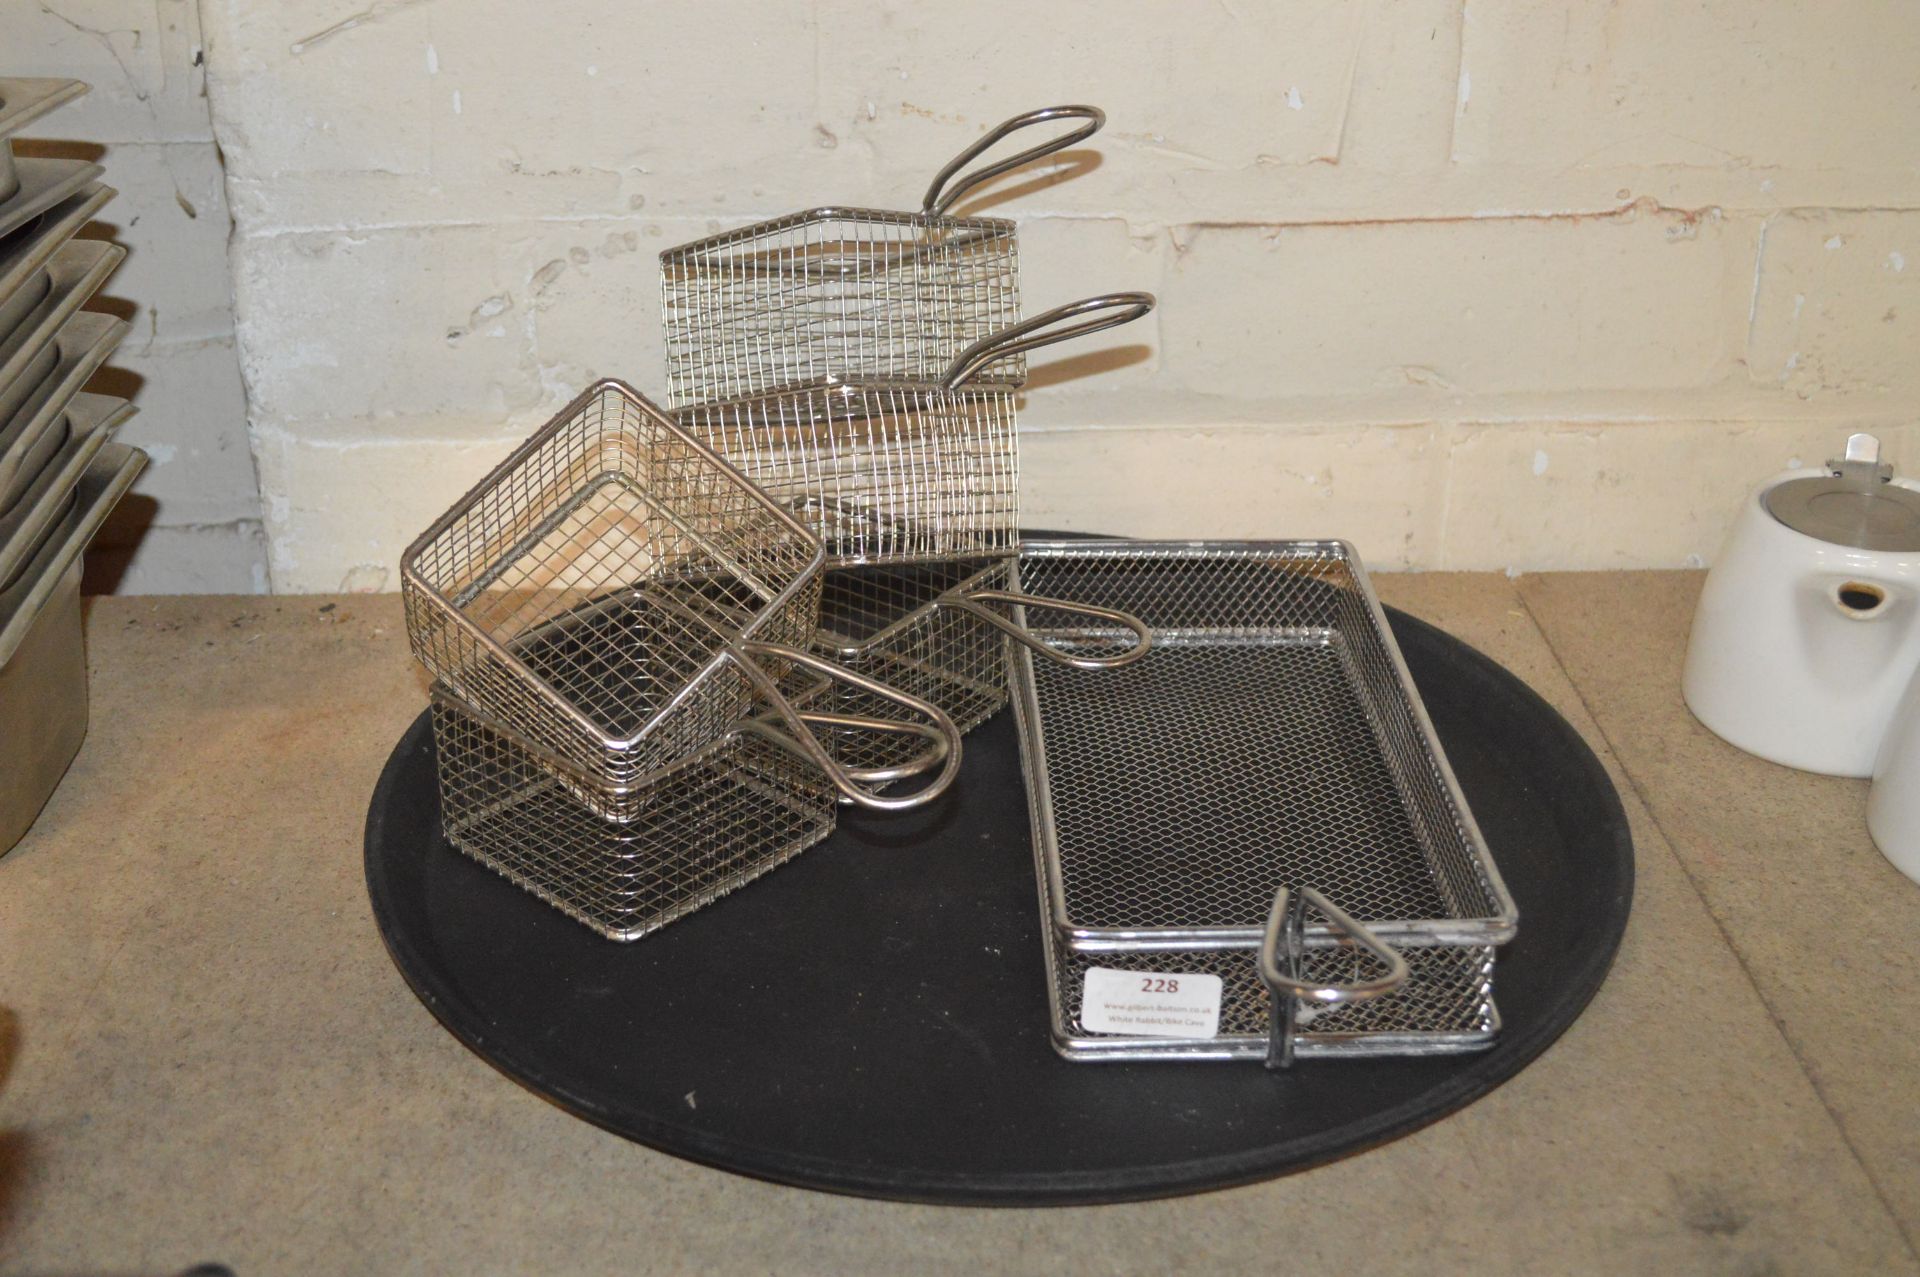 *Six Mini Chip Baskets and a Tray